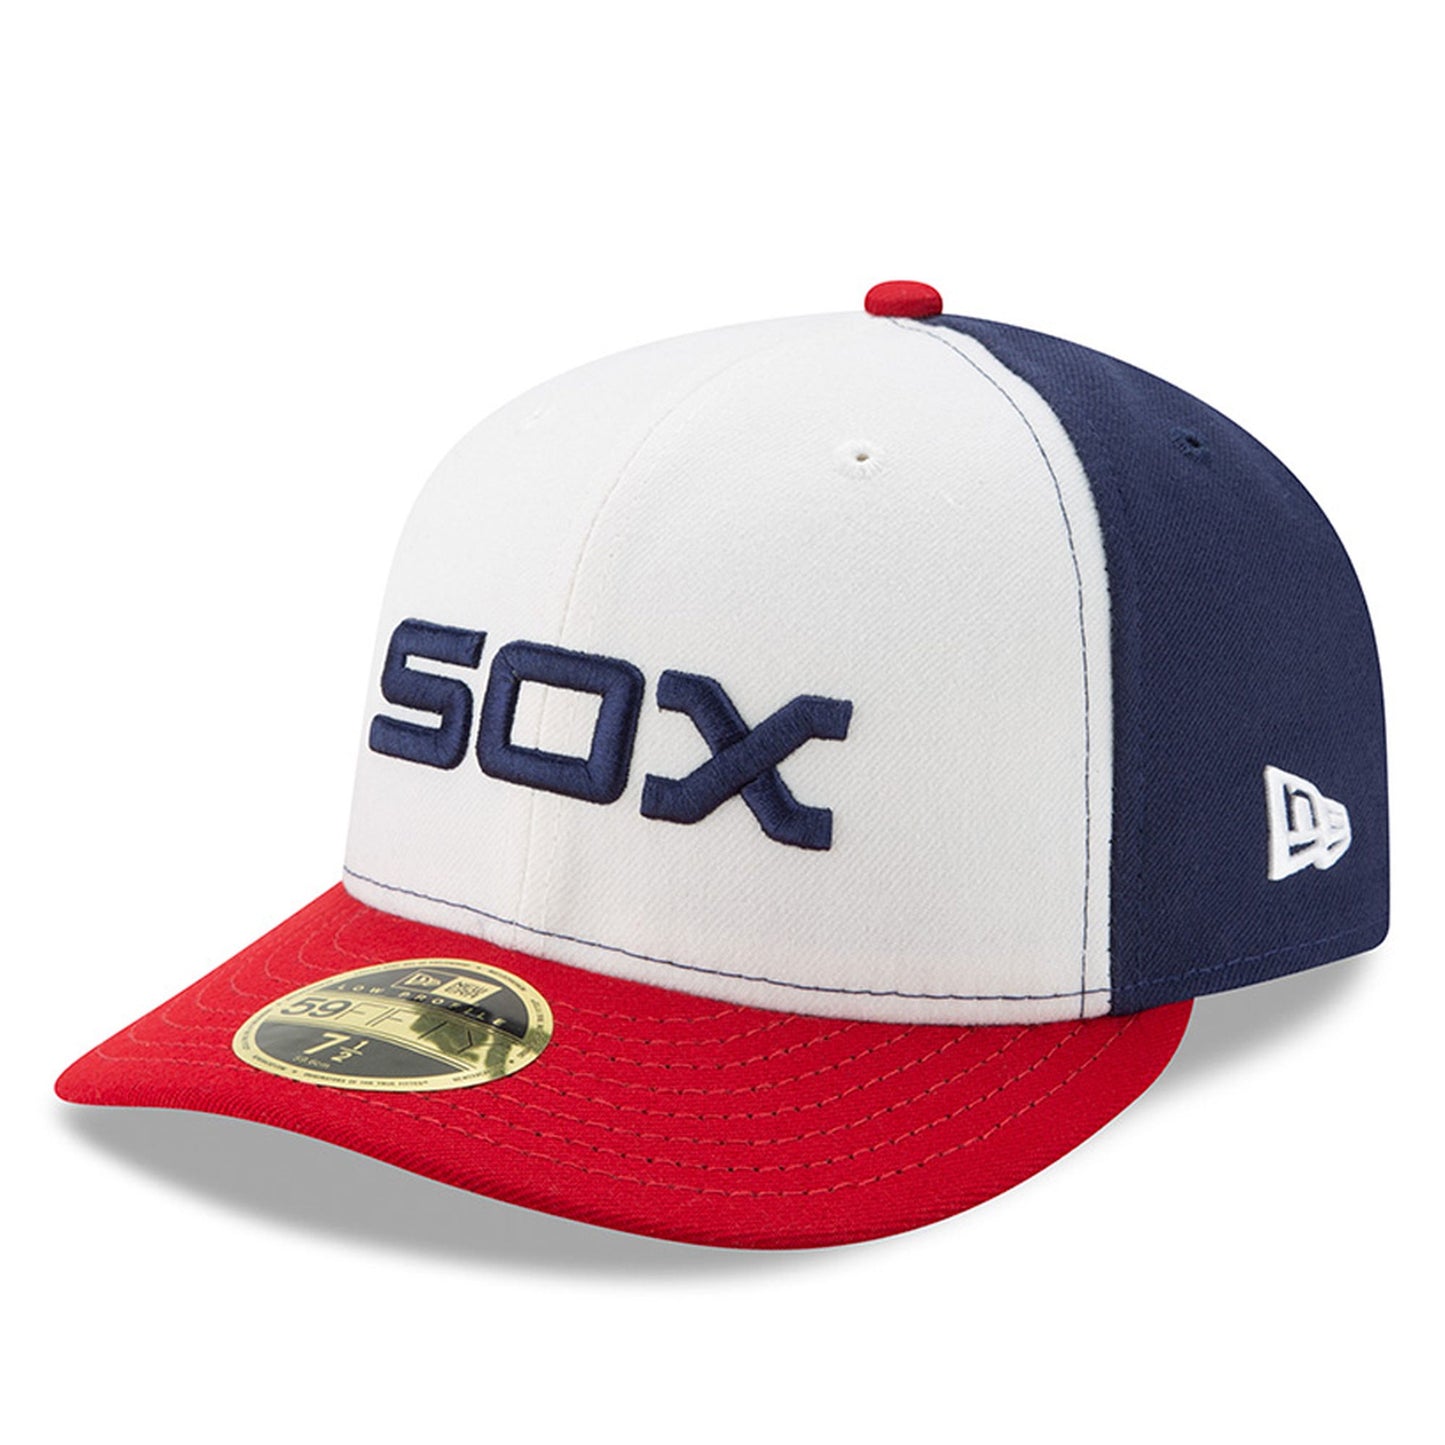 Men's Chicago White Sox New Era White/Red Alternate Authentic Collection On-Field Low Profile 59FIFTY Fitted Hat